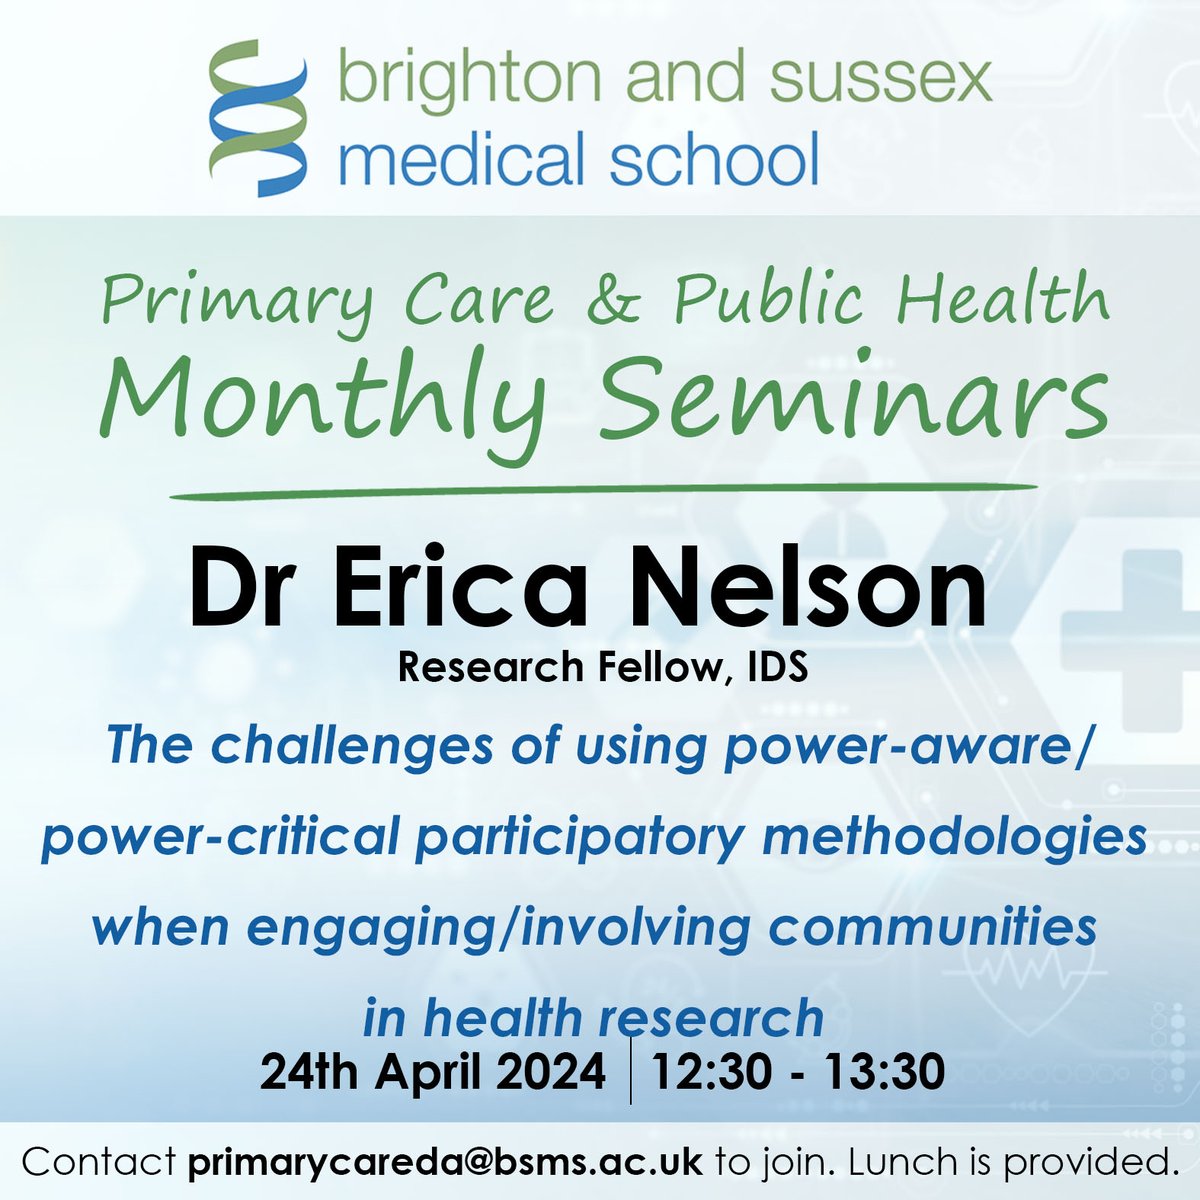 Don't forget our seminar tomorrow. Please contact primarycareda@bsms.ac.uk if you would like to attend.